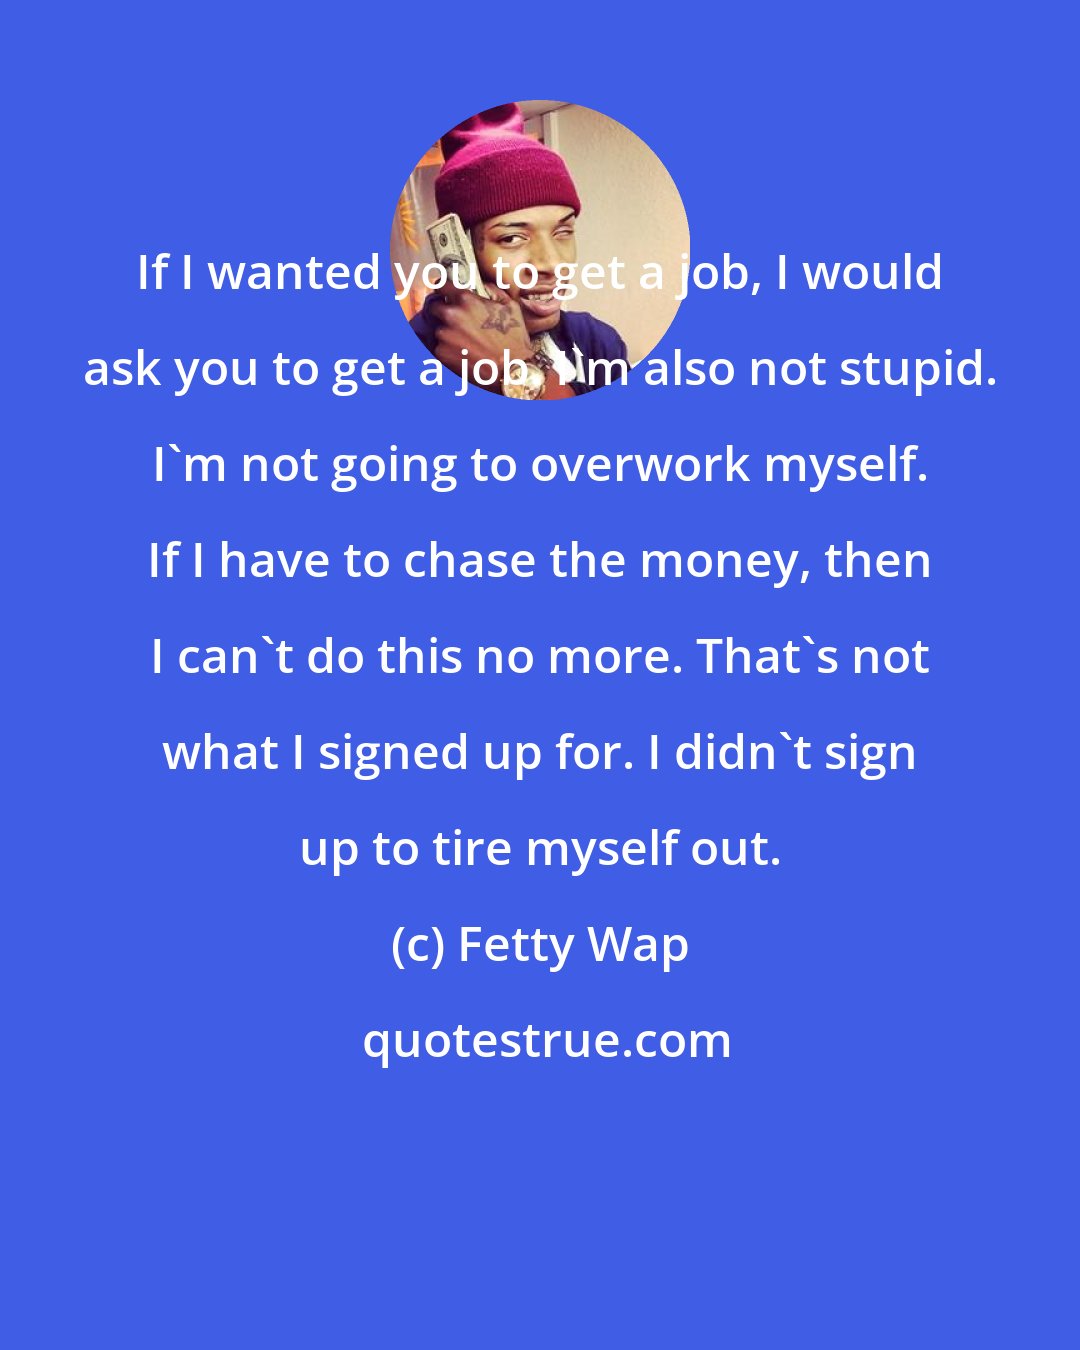 Fetty Wap: If I wanted you to get a job, I would ask you to get a job. I'm also not stupid. I'm not going to overwork myself. If I have to chase the money, then I can't do this no more. That's not what I signed up for. I didn't sign up to tire myself out.